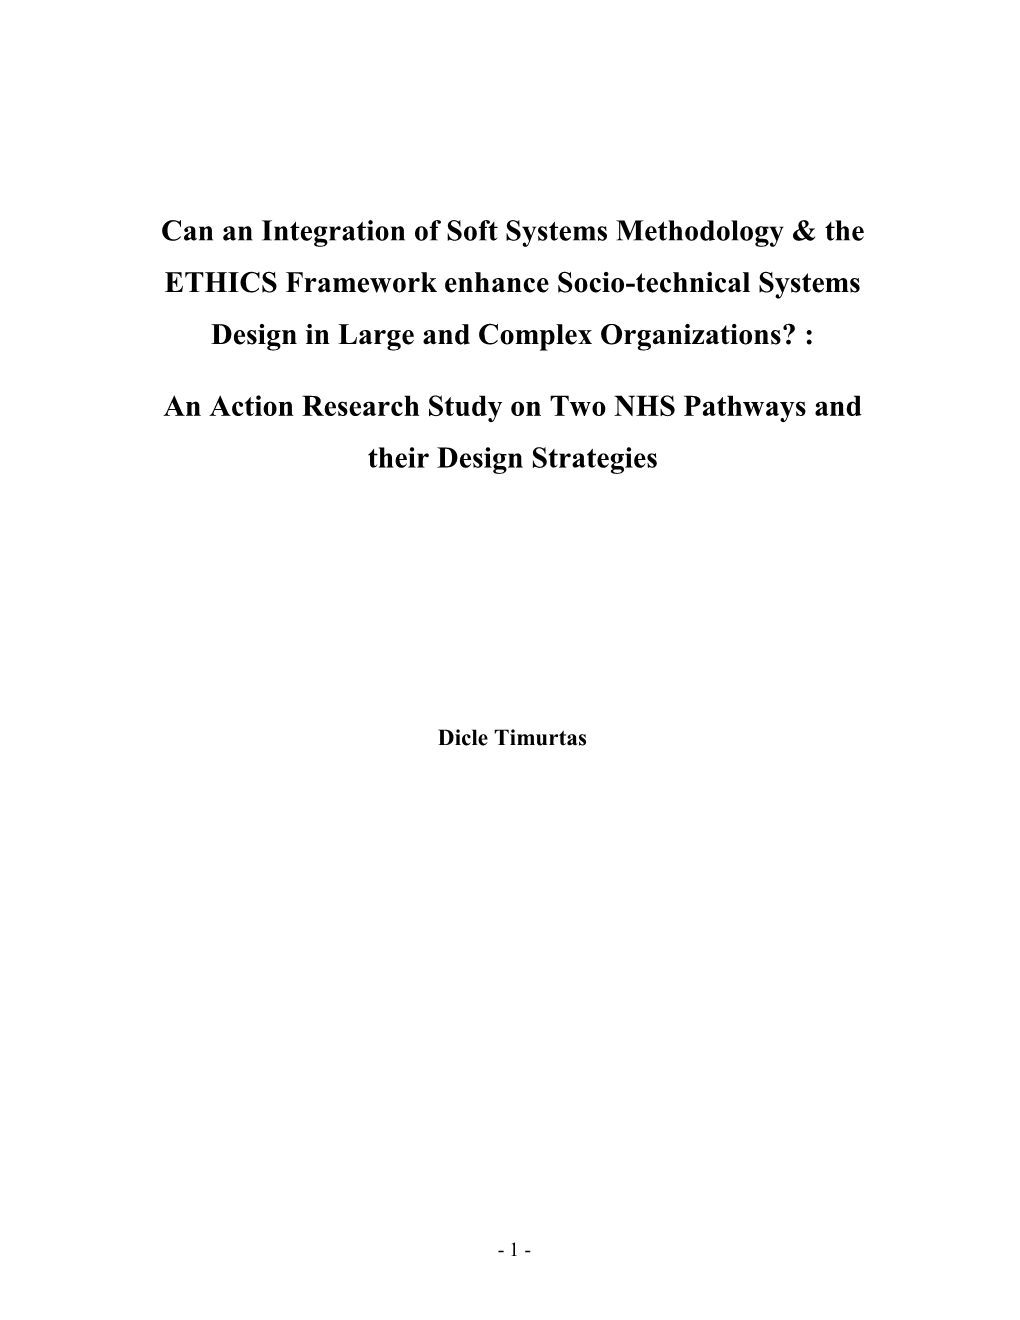 Can an Integration of Soft Systems Methodology & the ETHICS Framework Enhance Socio-Technical Systems Design in Large and Co